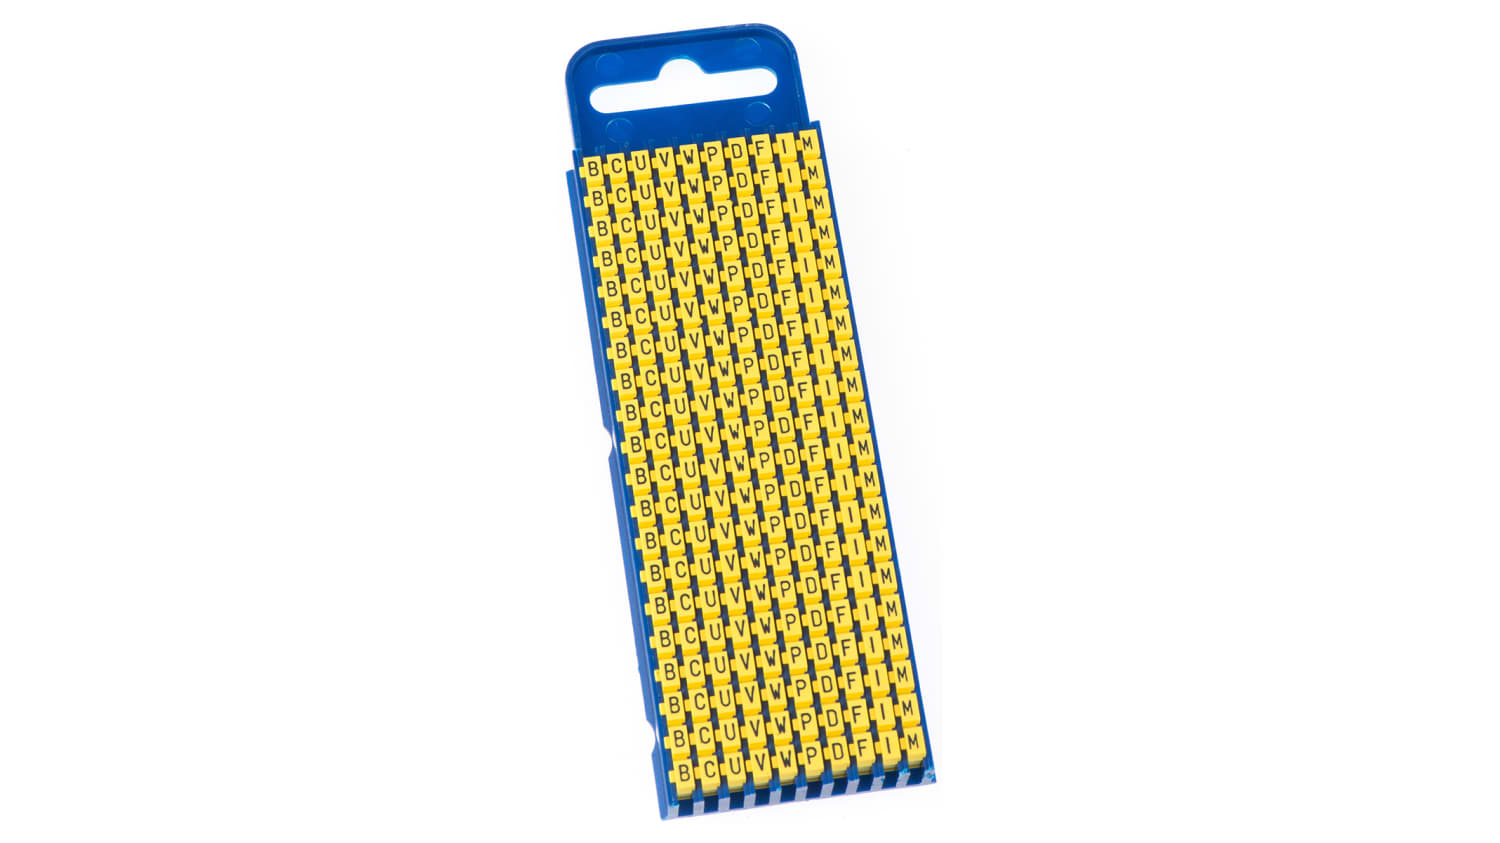 561 002 Wic2 B C U V W P D F I M Pa66 Ye Hellermanntyton Wic2 Snap On Cable Marker Pre Printed B C D F I M P U V W Yellow 2 8 3 8 Dia Rs Components